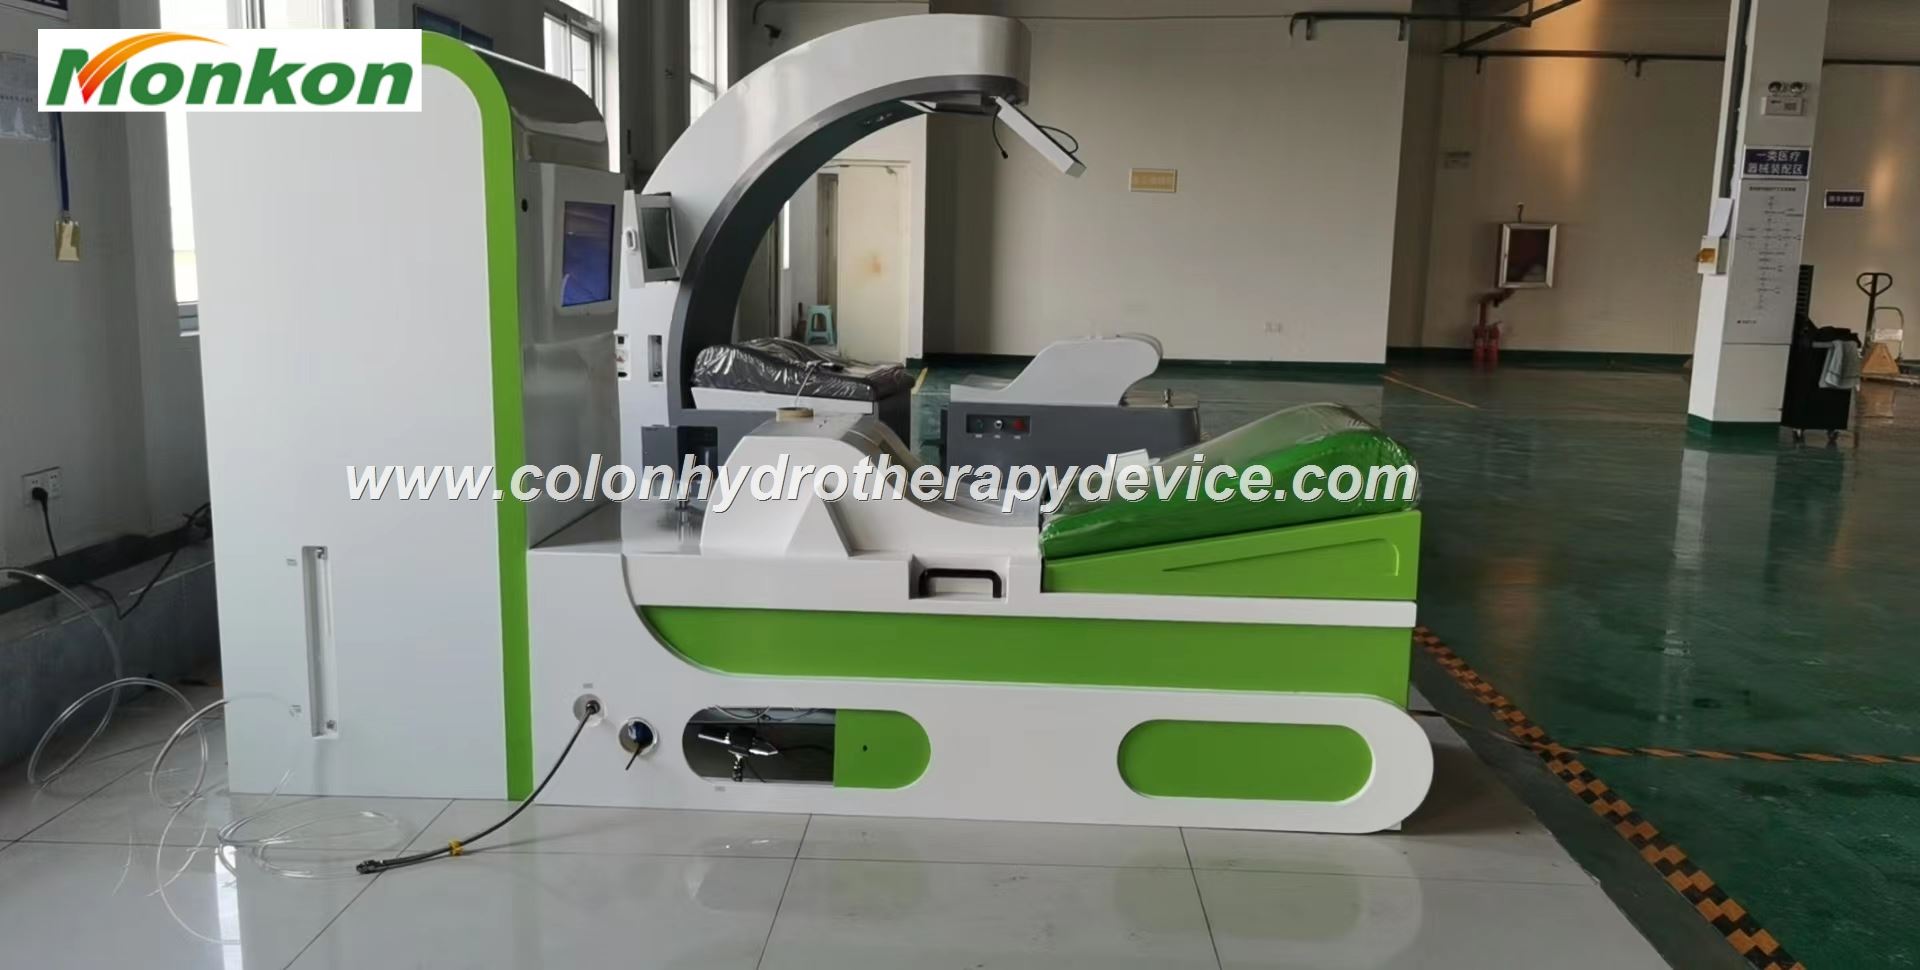 MAIKONG Colon Hydrotherapy Machines for Sale